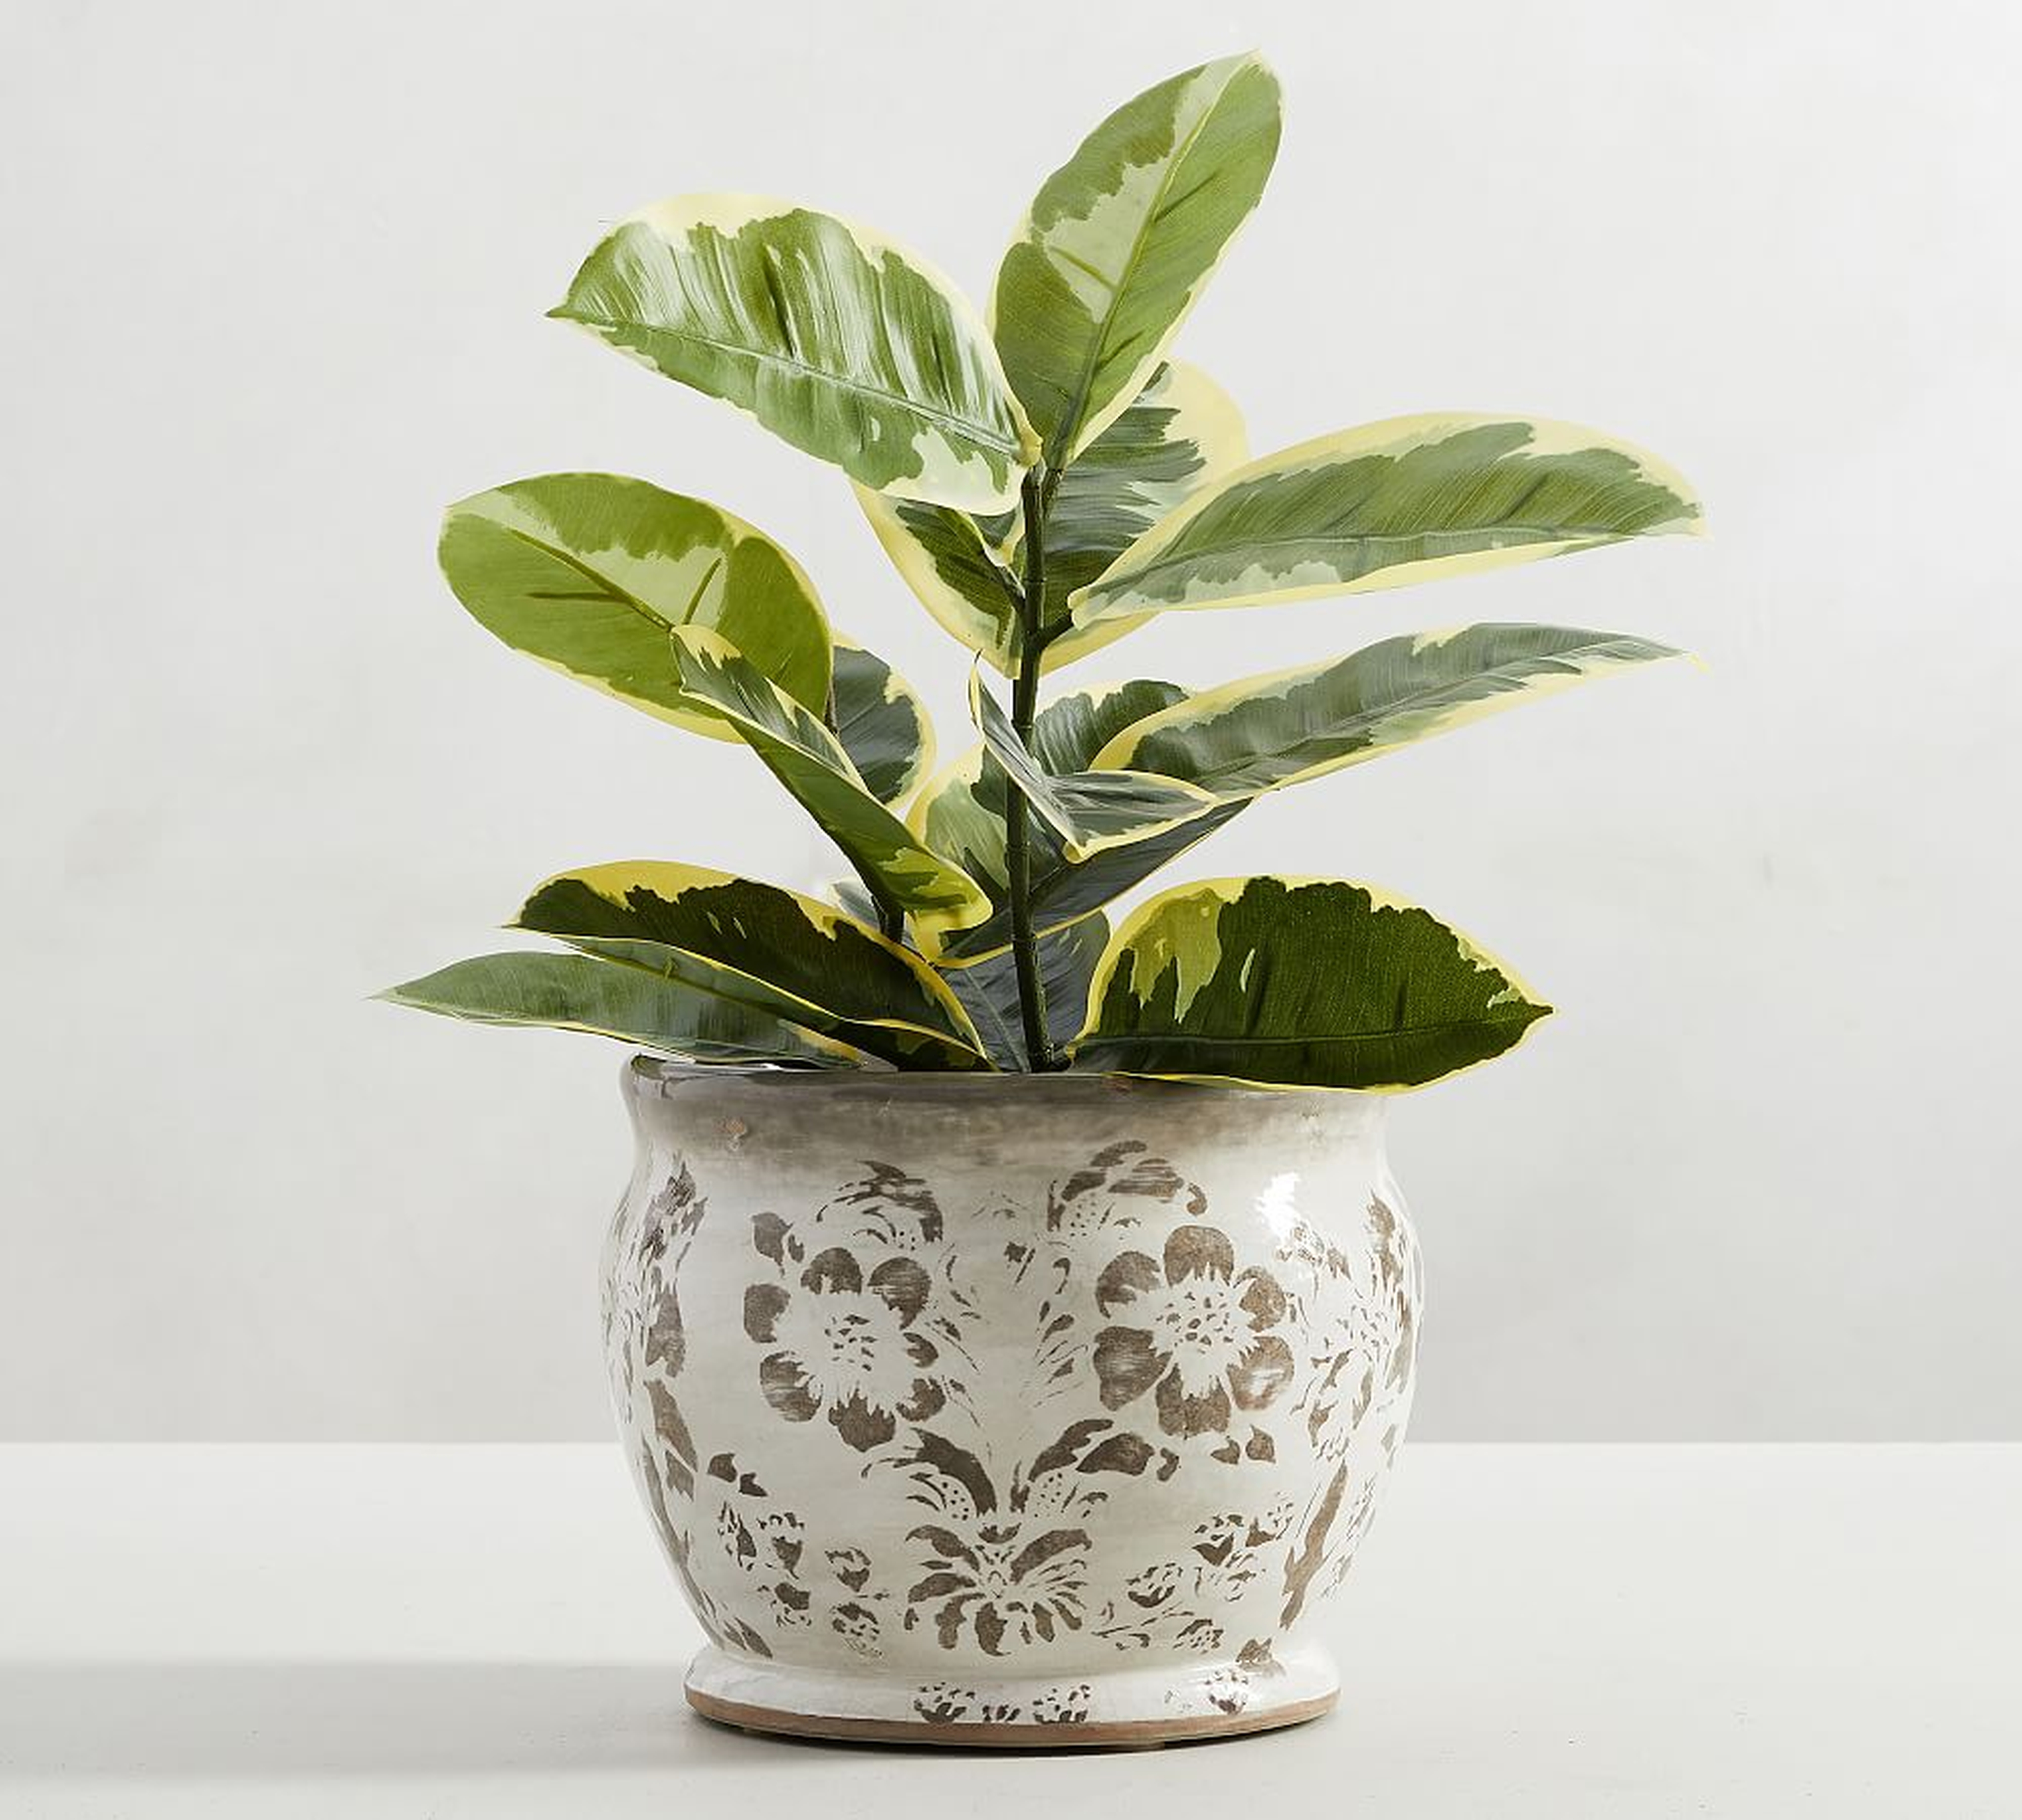 Collette Floral Handcrafted Terra Cotta Planter, Gray - Pottery Barn